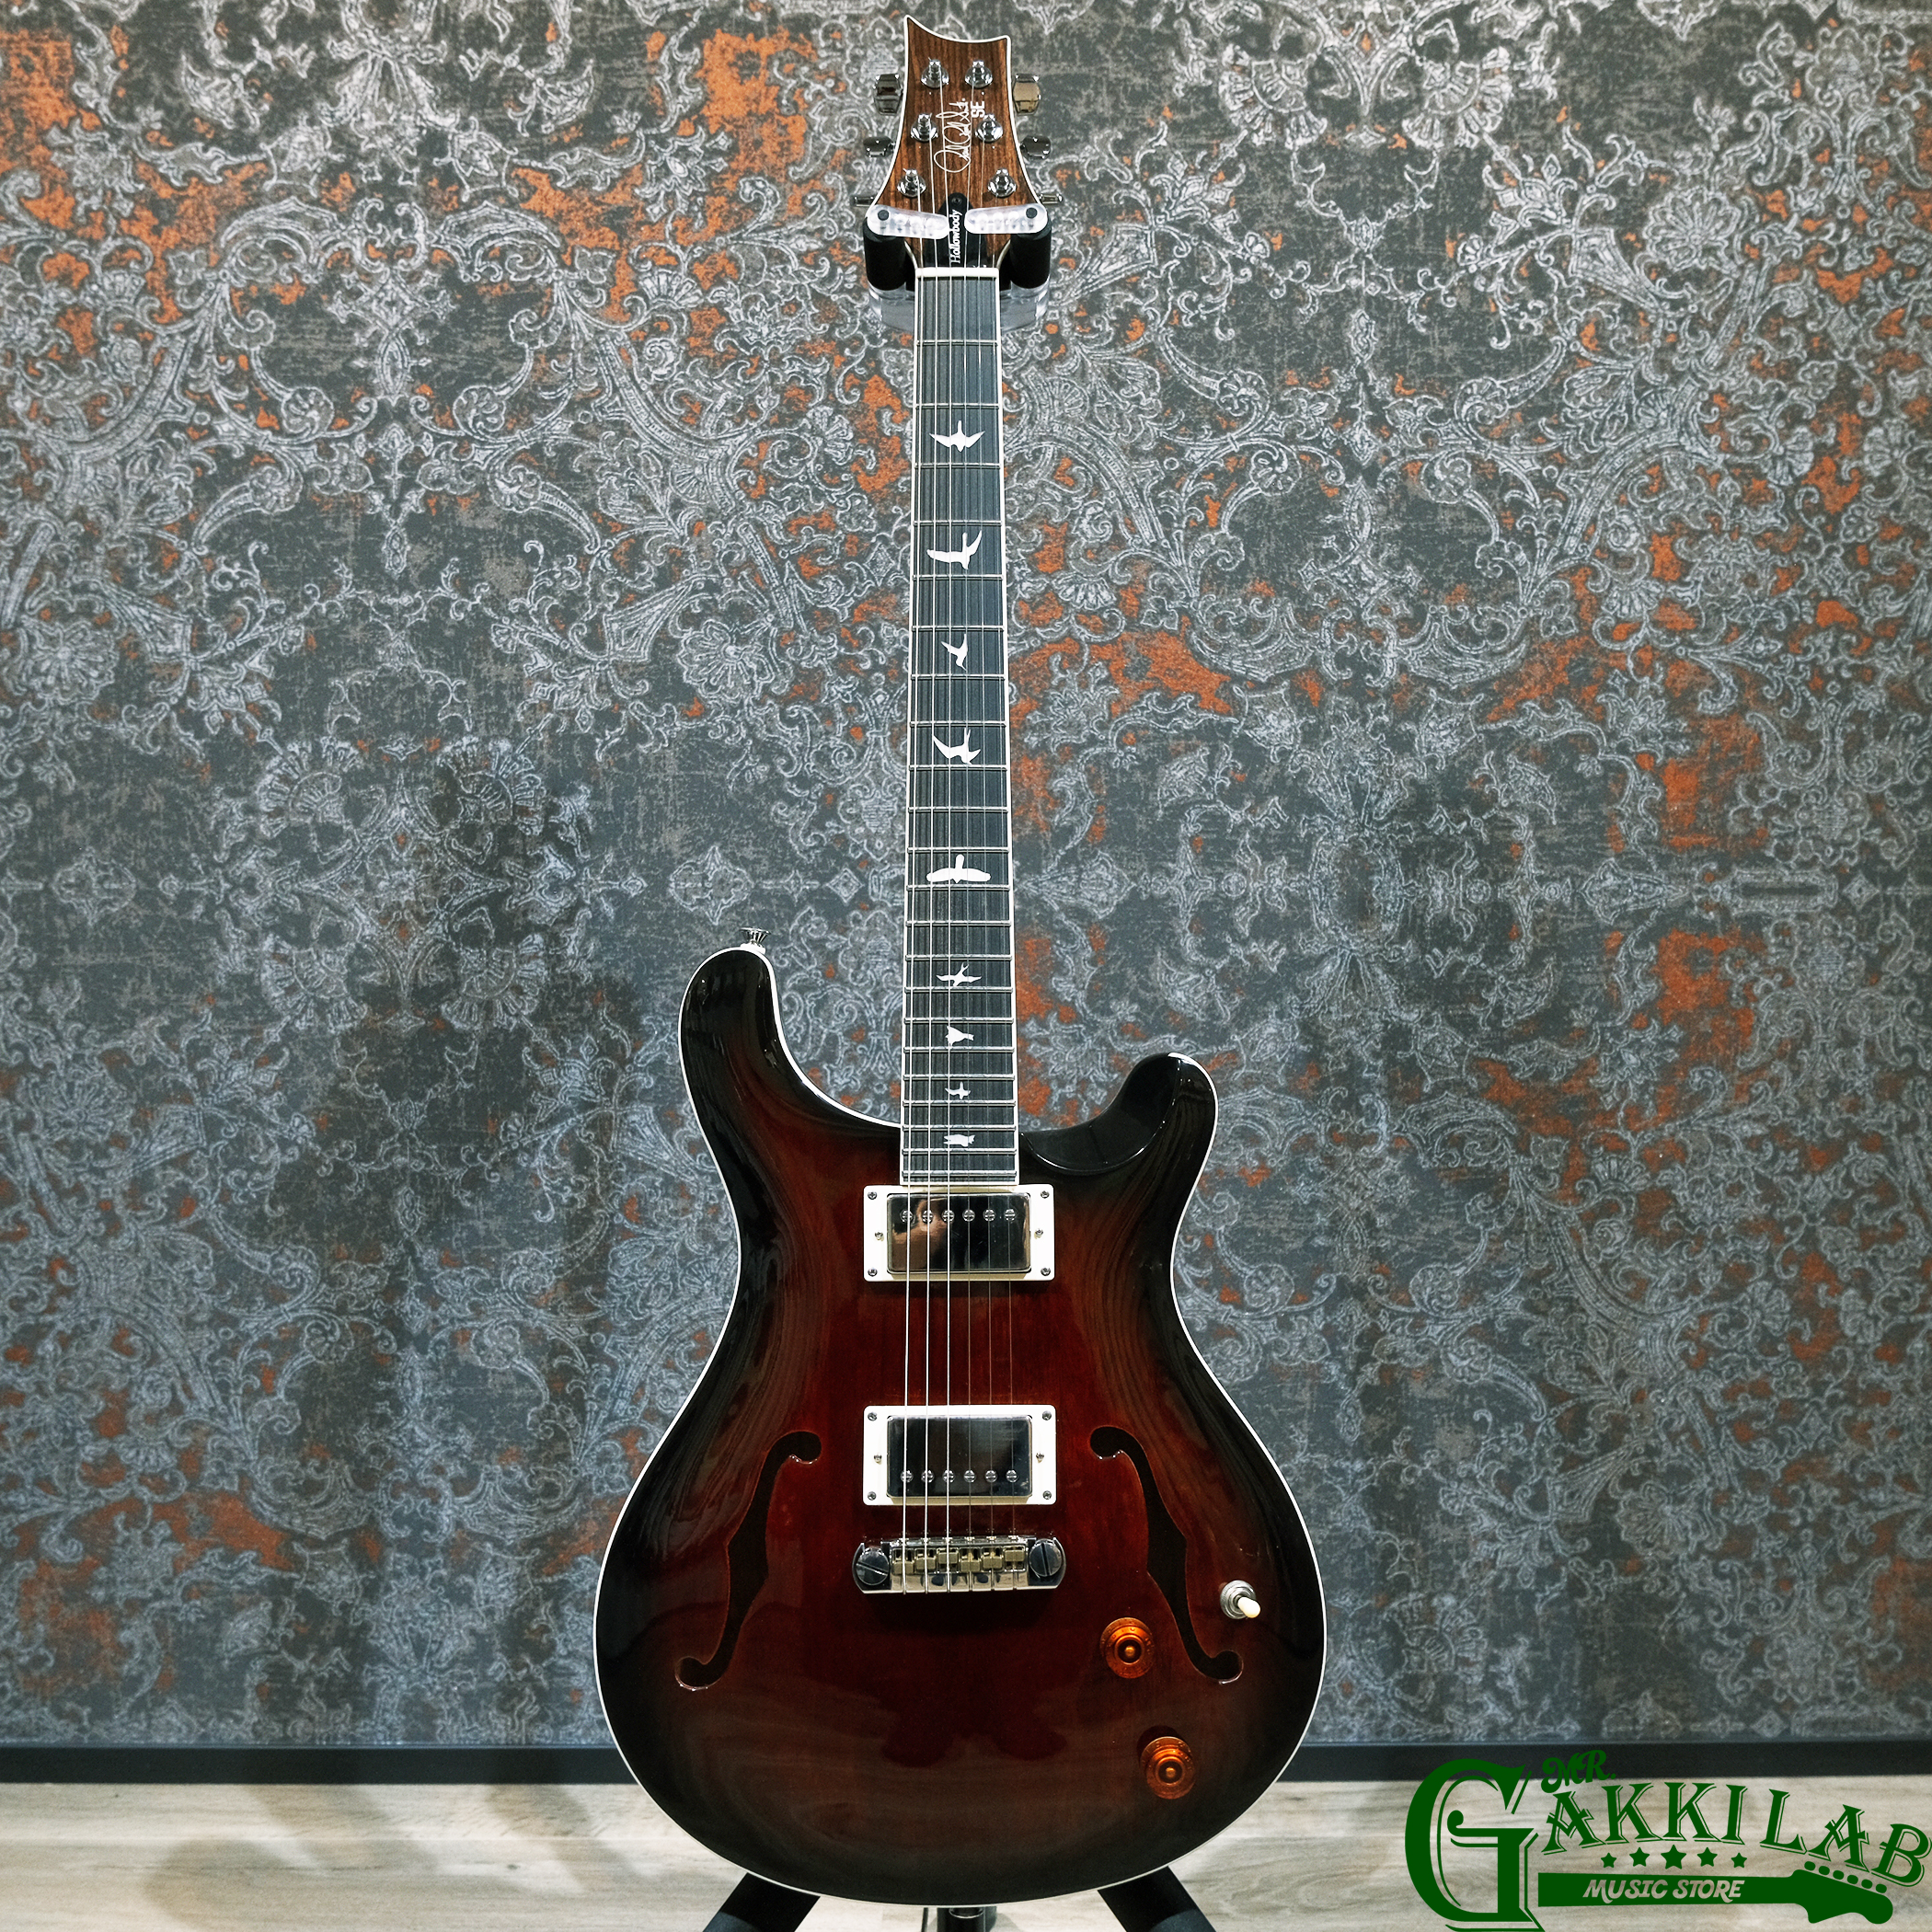 Paul Reed Smith(PRS) SE Hollowbody Standard Fire Red Burst | 札幌 